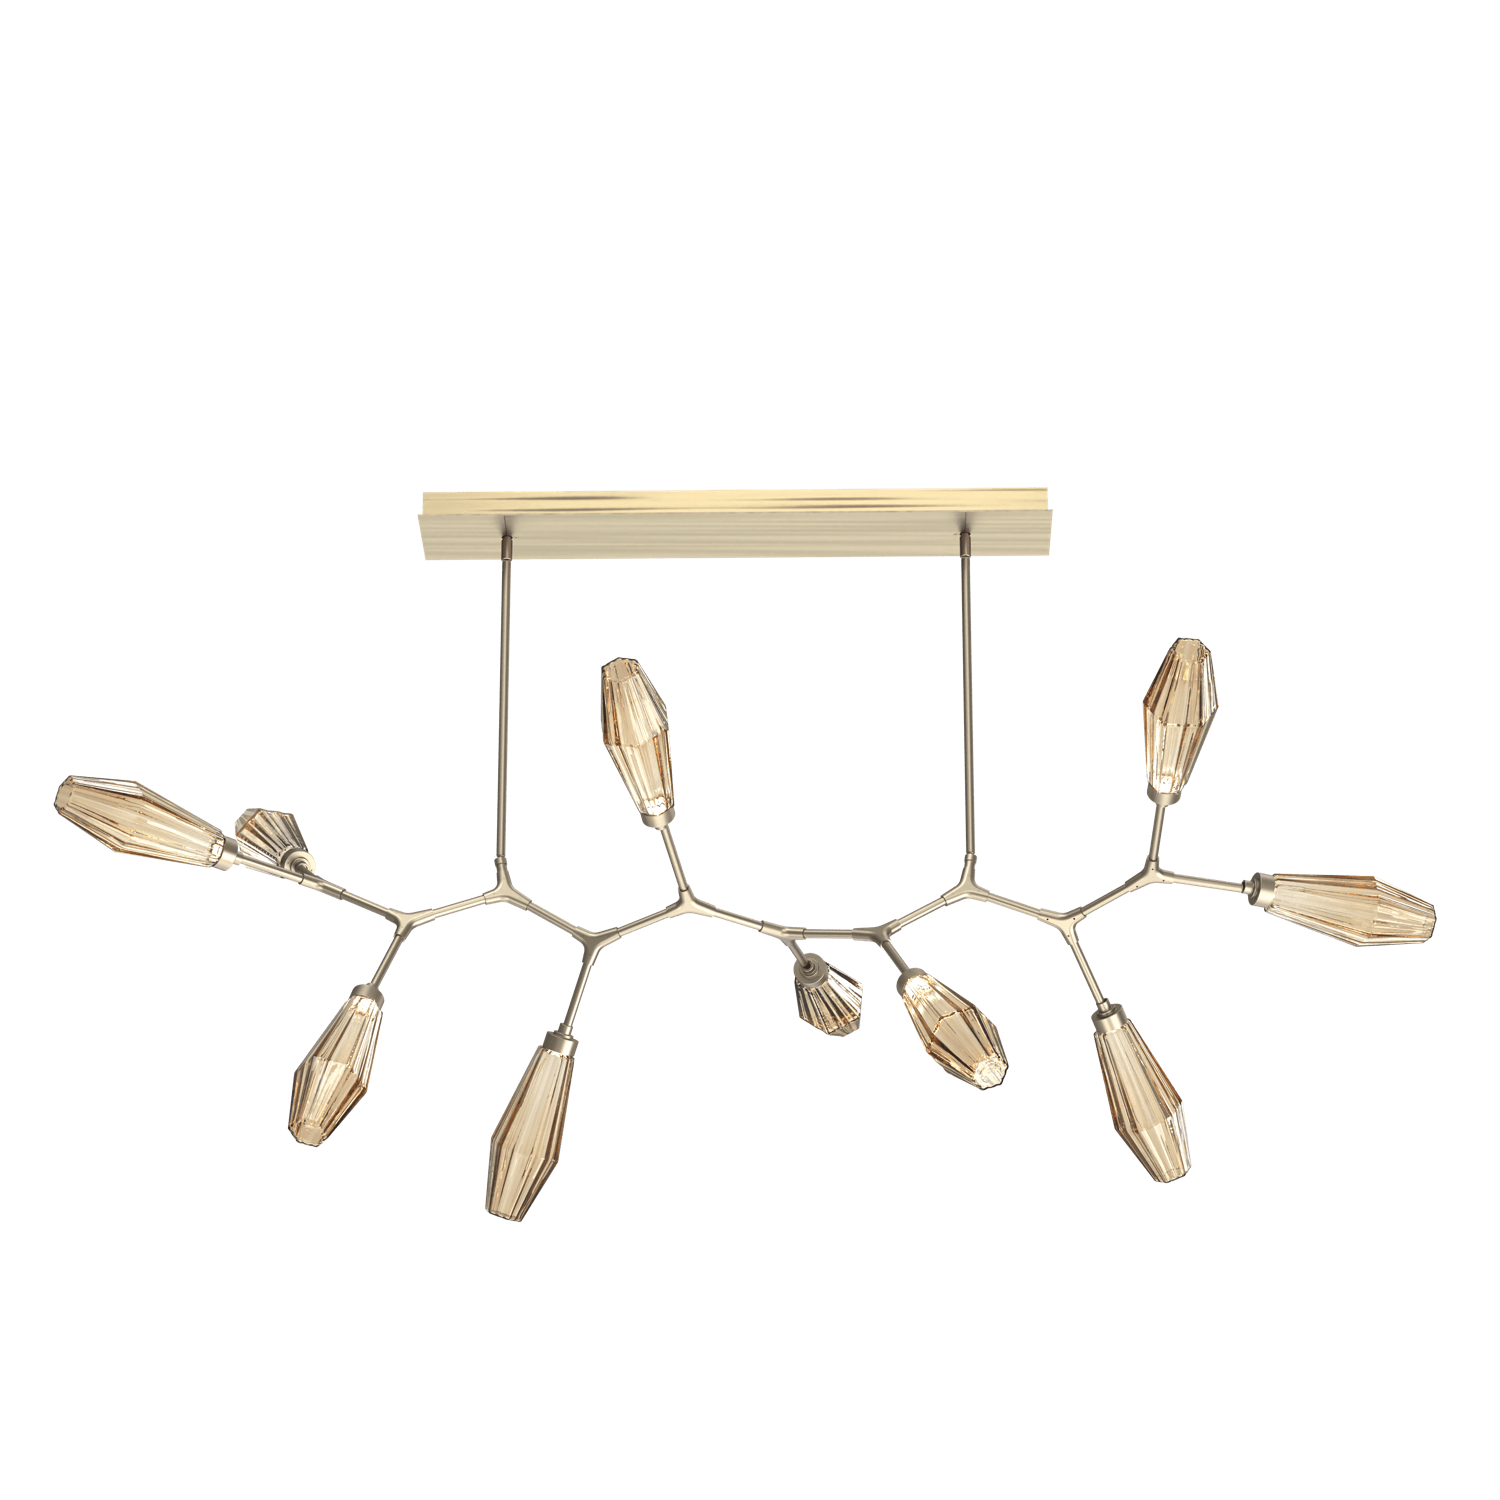 PLB0049-BC-HB-RB-Hammerton-Studio-Aalto-10-light-modern-branch-chandelier-with-heritage-brass-finish-and-optic-ribbed-bronze-glass-shades-and-LED-lamping